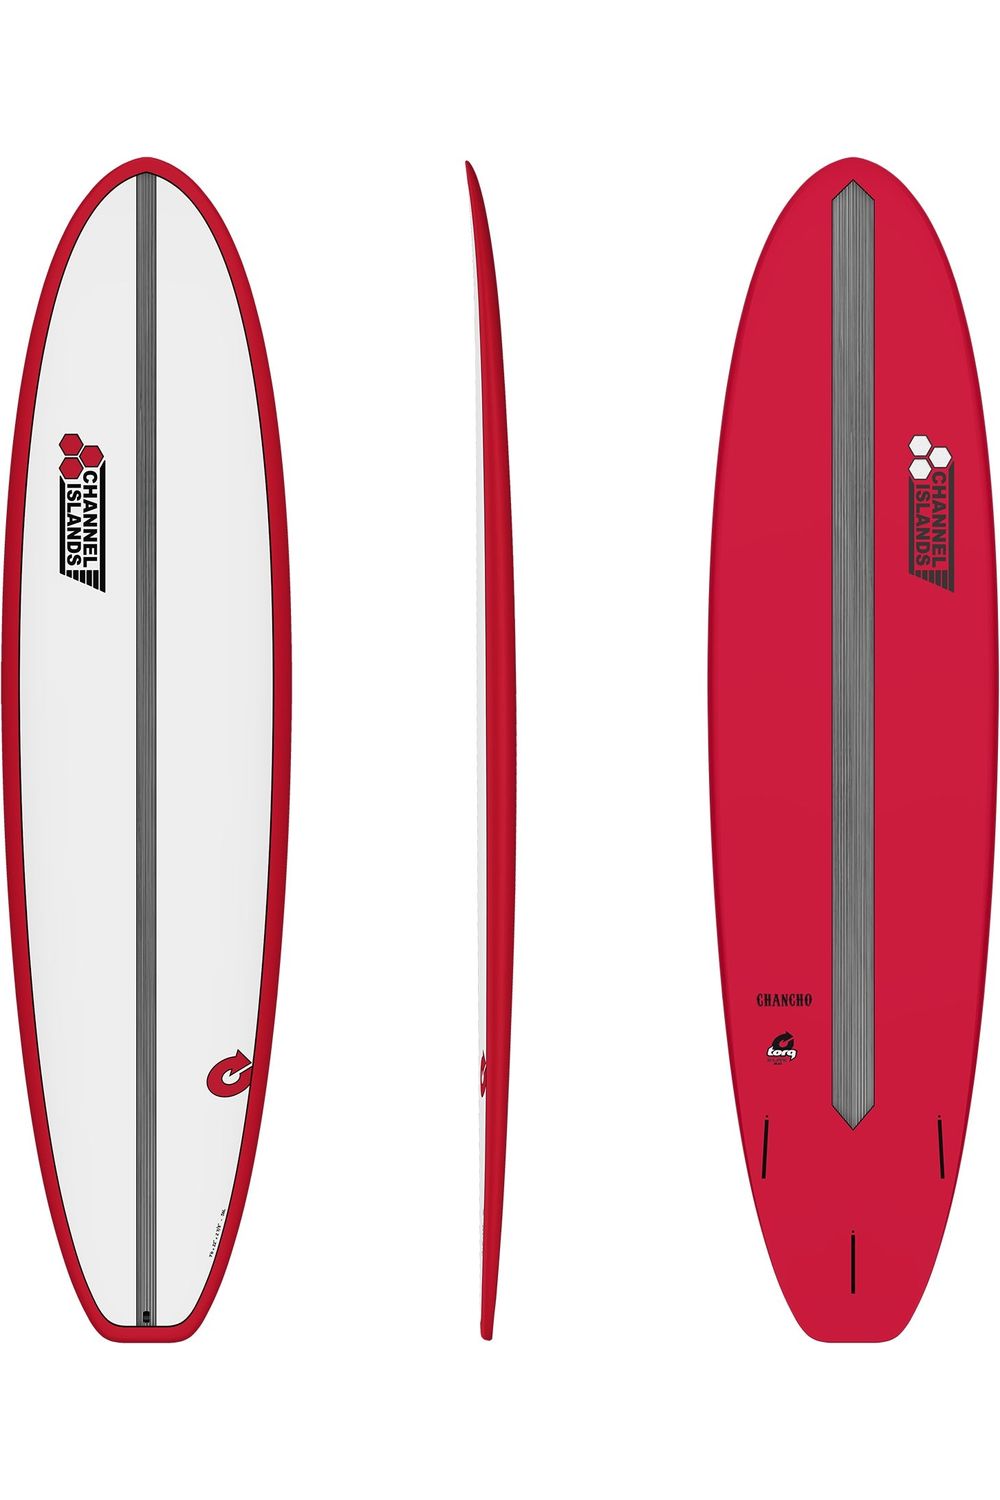 Top, bottom and side profile of the Torq Xlite Chancho surfboard in red white